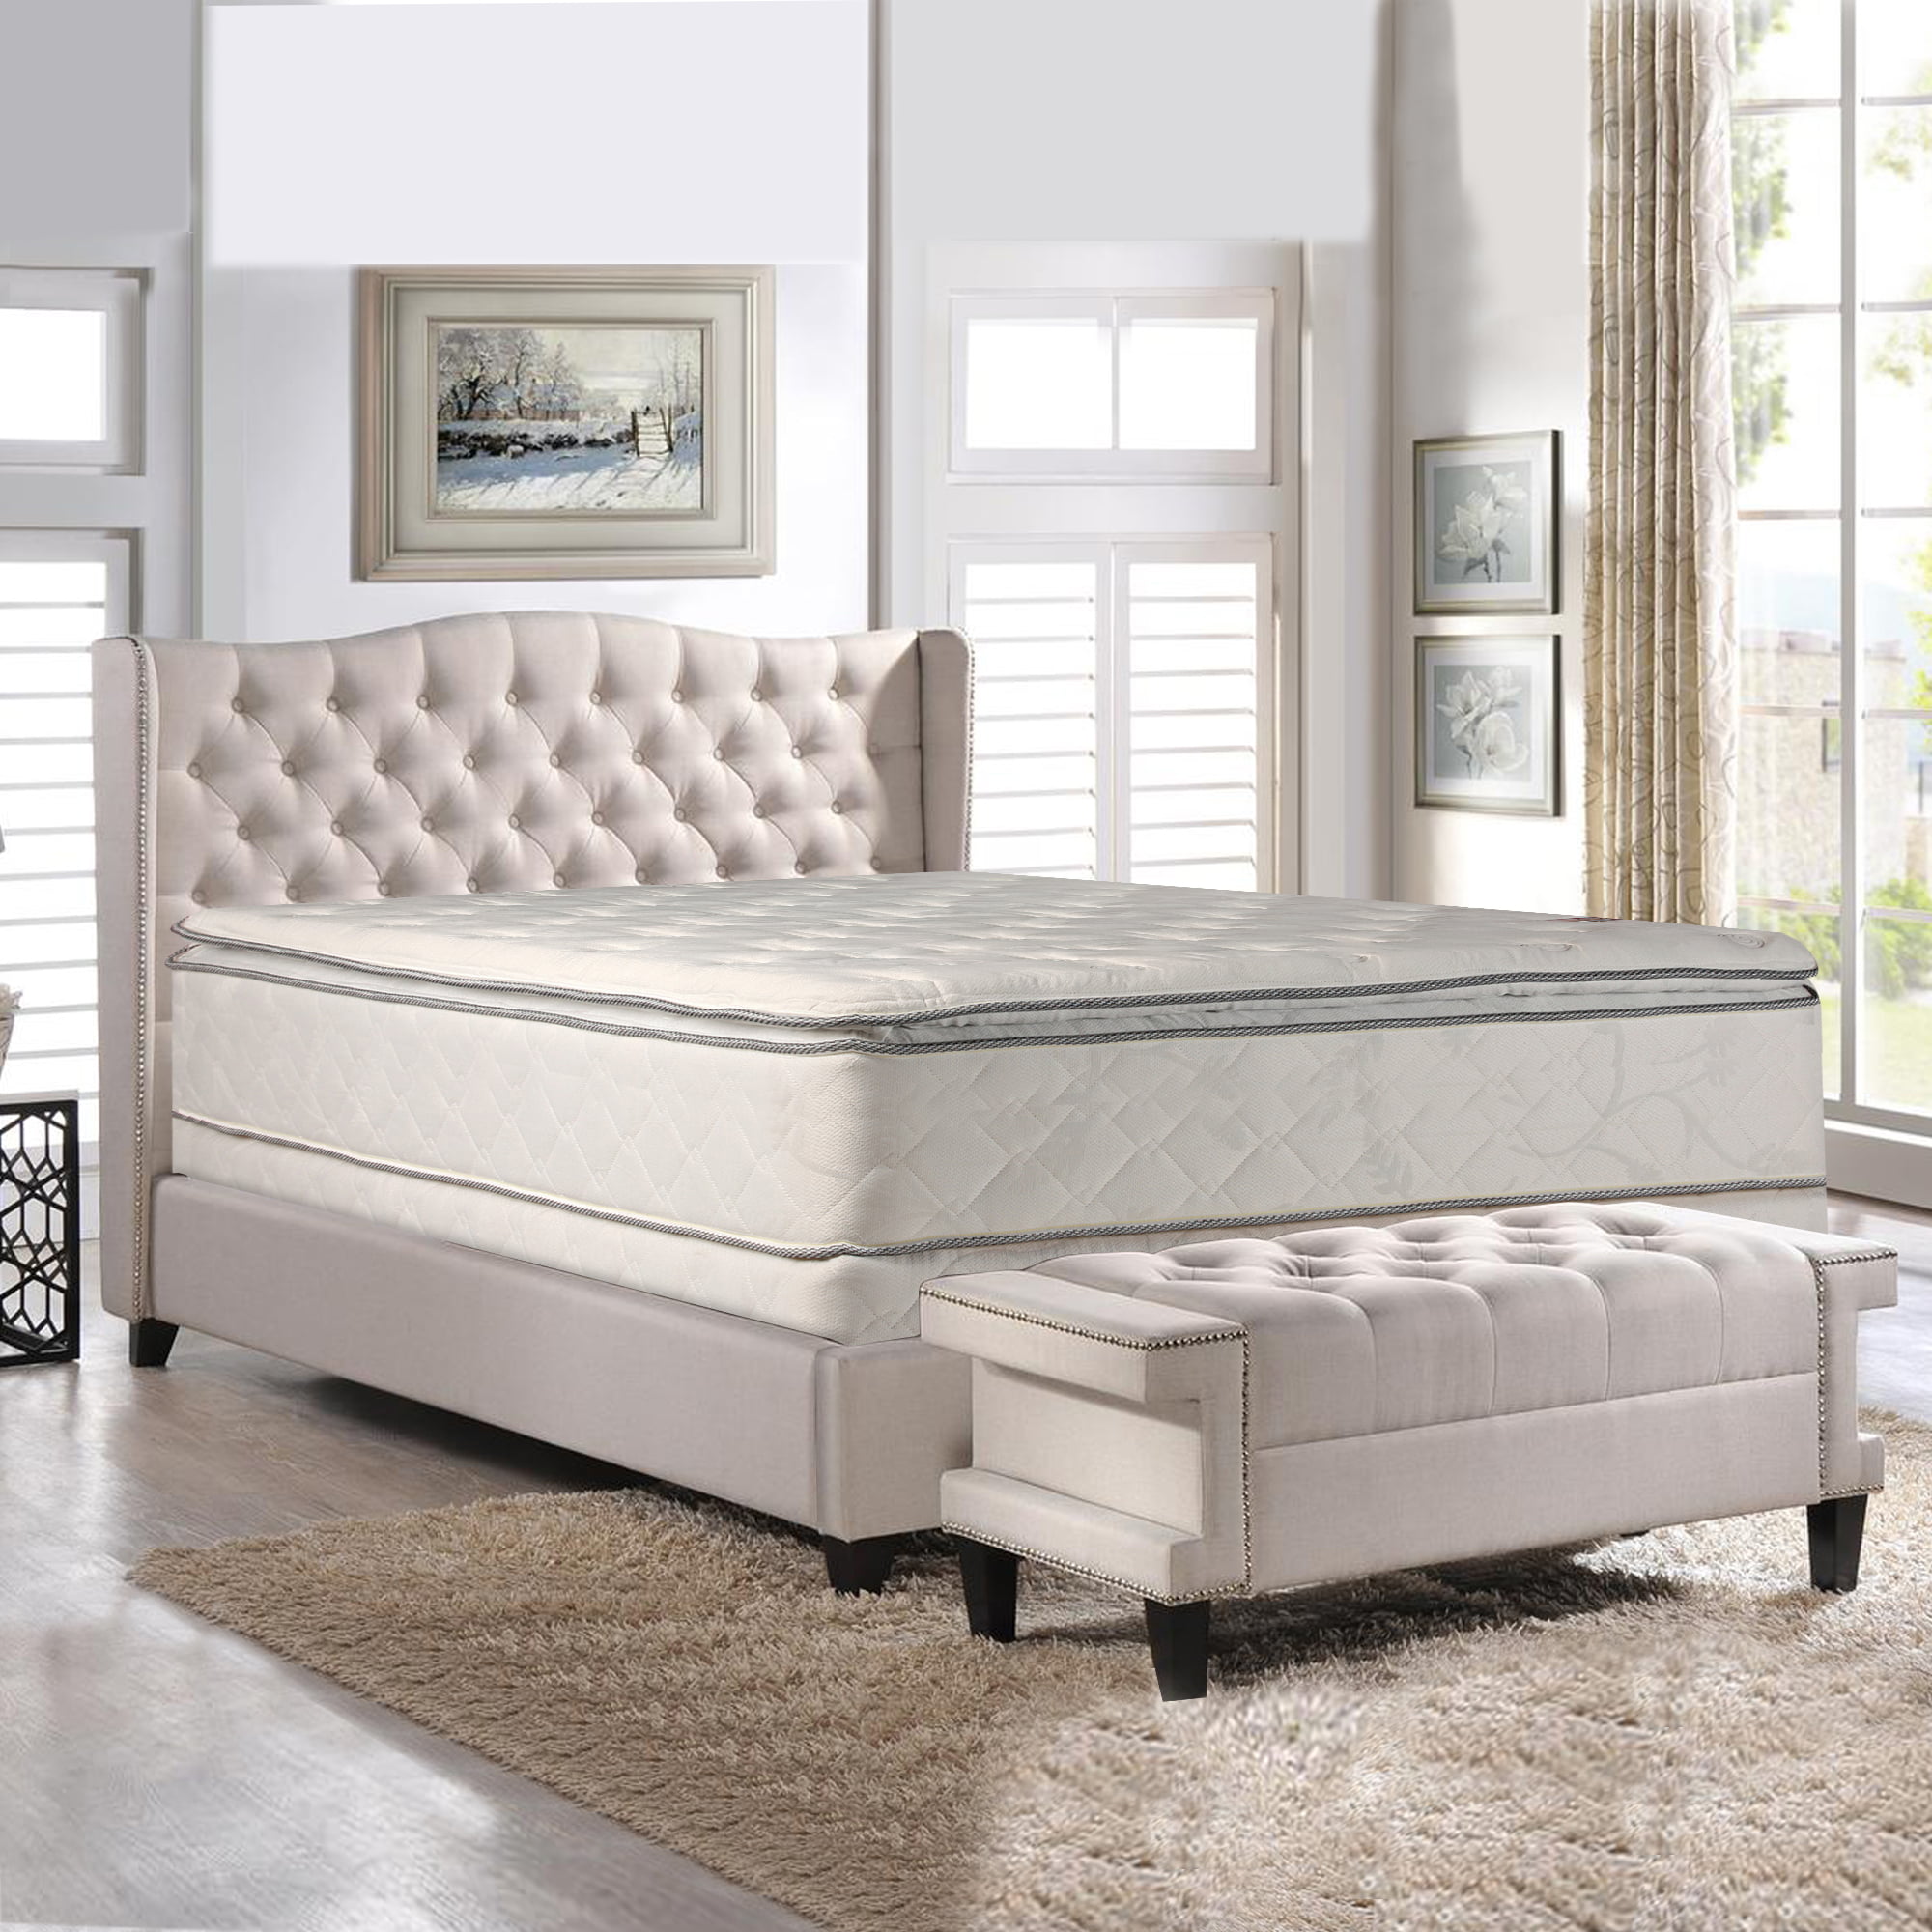 Twin XL Size Continental Sleep No Assembly Required 10-Inch Medium Plush Pillowtop Innerspring Mattress and 4-inch Box Spring//Foundation Set